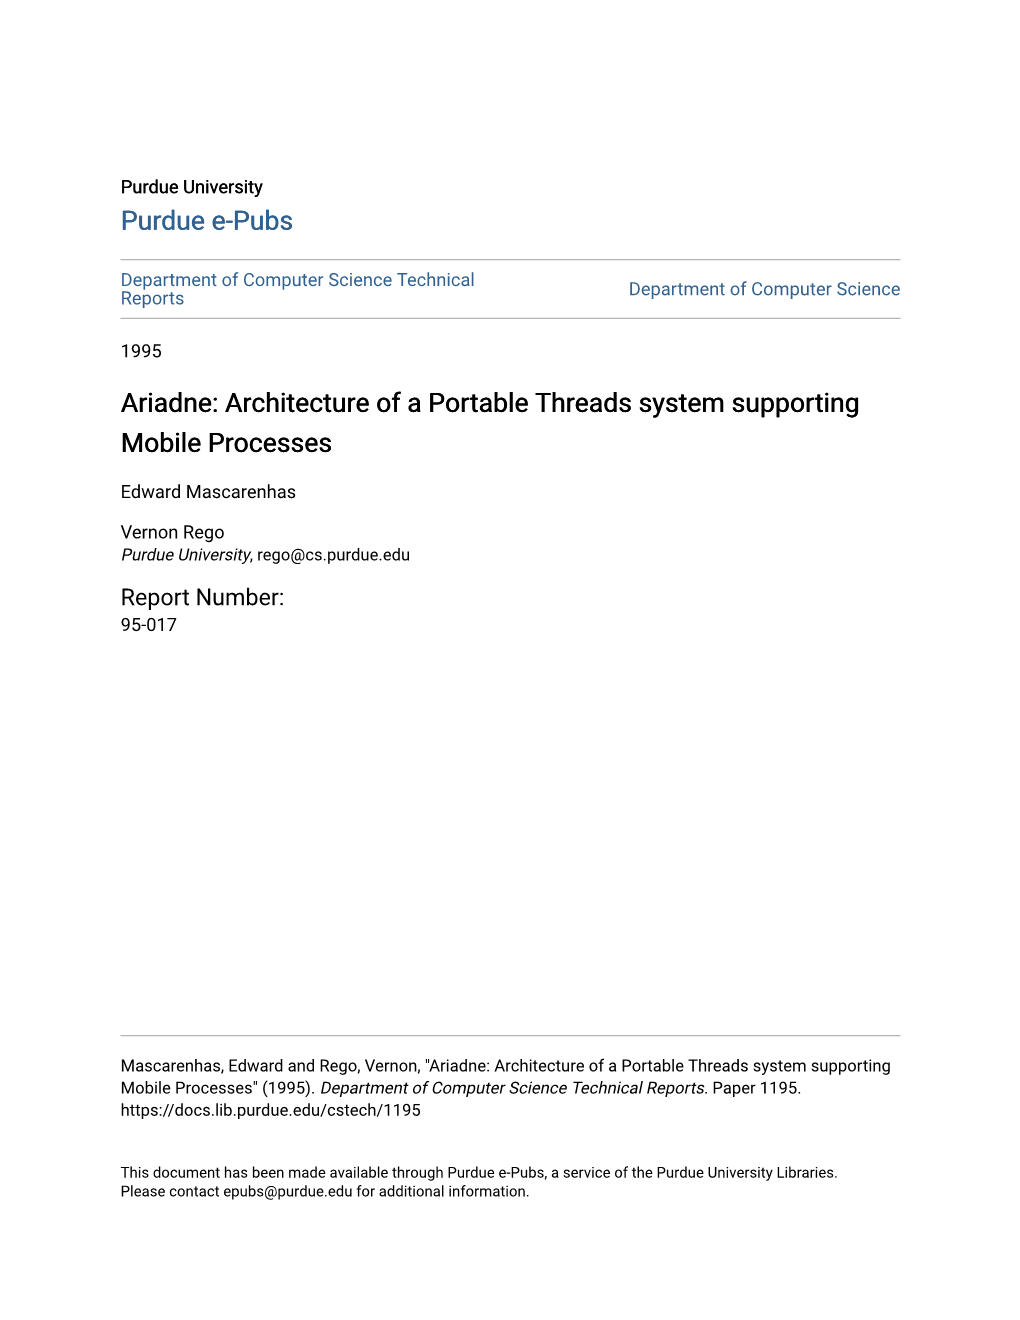 Ariadne: Architecture of a Portable Threads System Supporting Mobile Processes